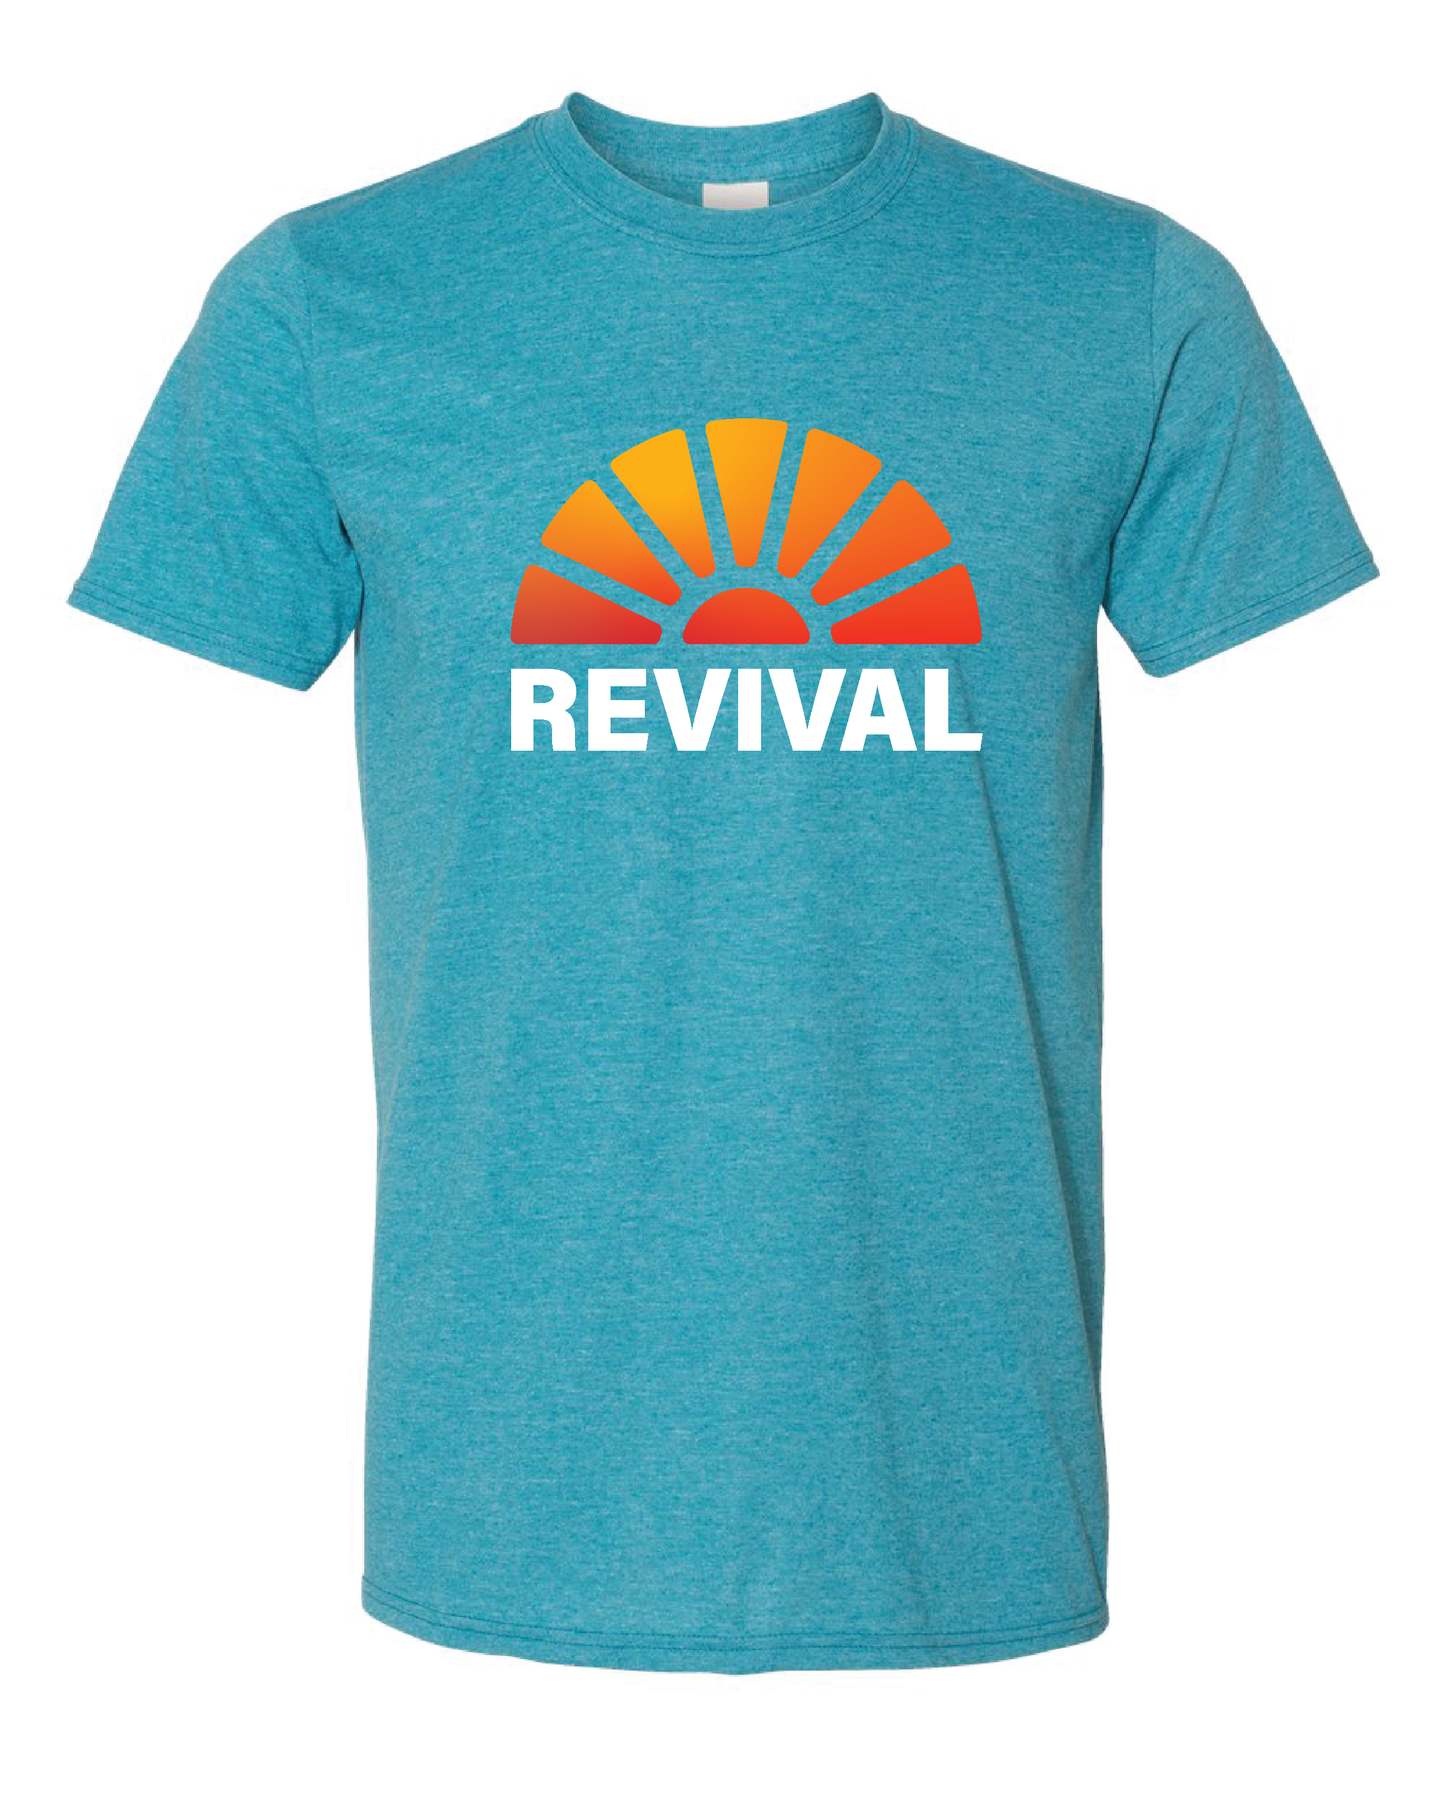 This Is Revival T Shirt